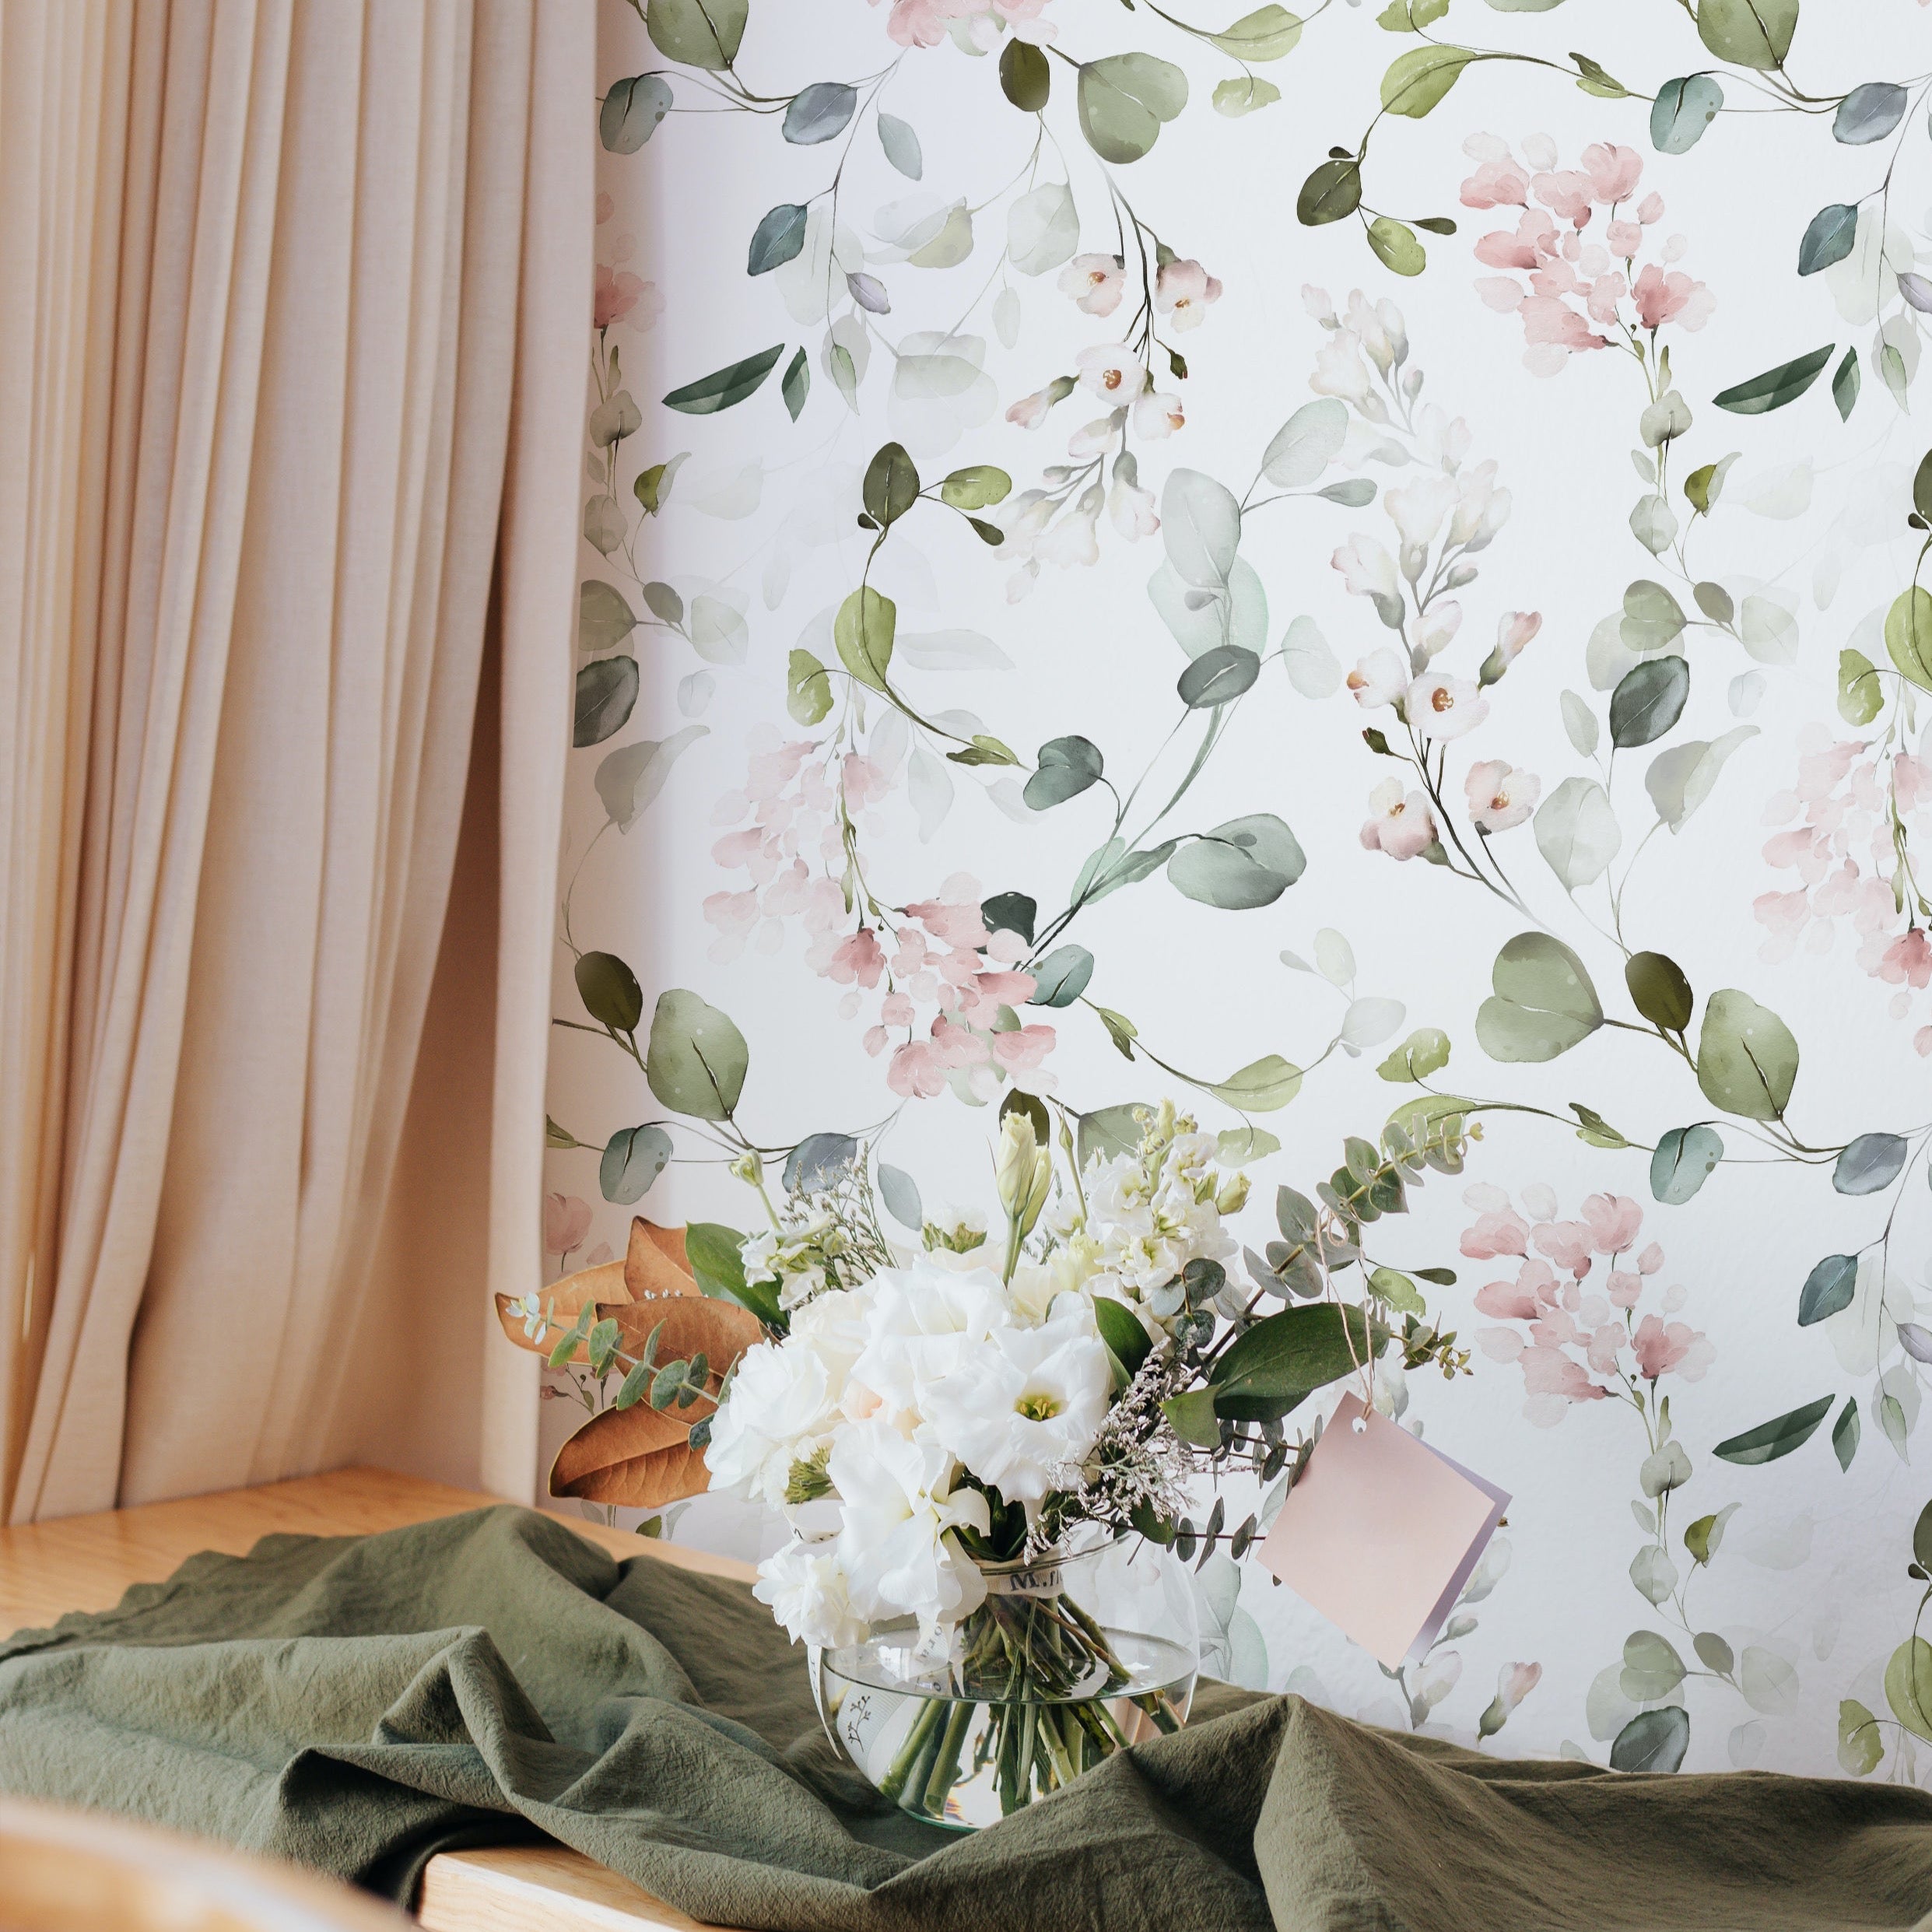 A corner of a bright room showcasing the Pink Floral & Herbs Wallpaper, paired with a wooden table dressed with a sage green throw and a bouquet of white flowers. The graceful floral pattern exudes a calm and sophisticated atmosphere.